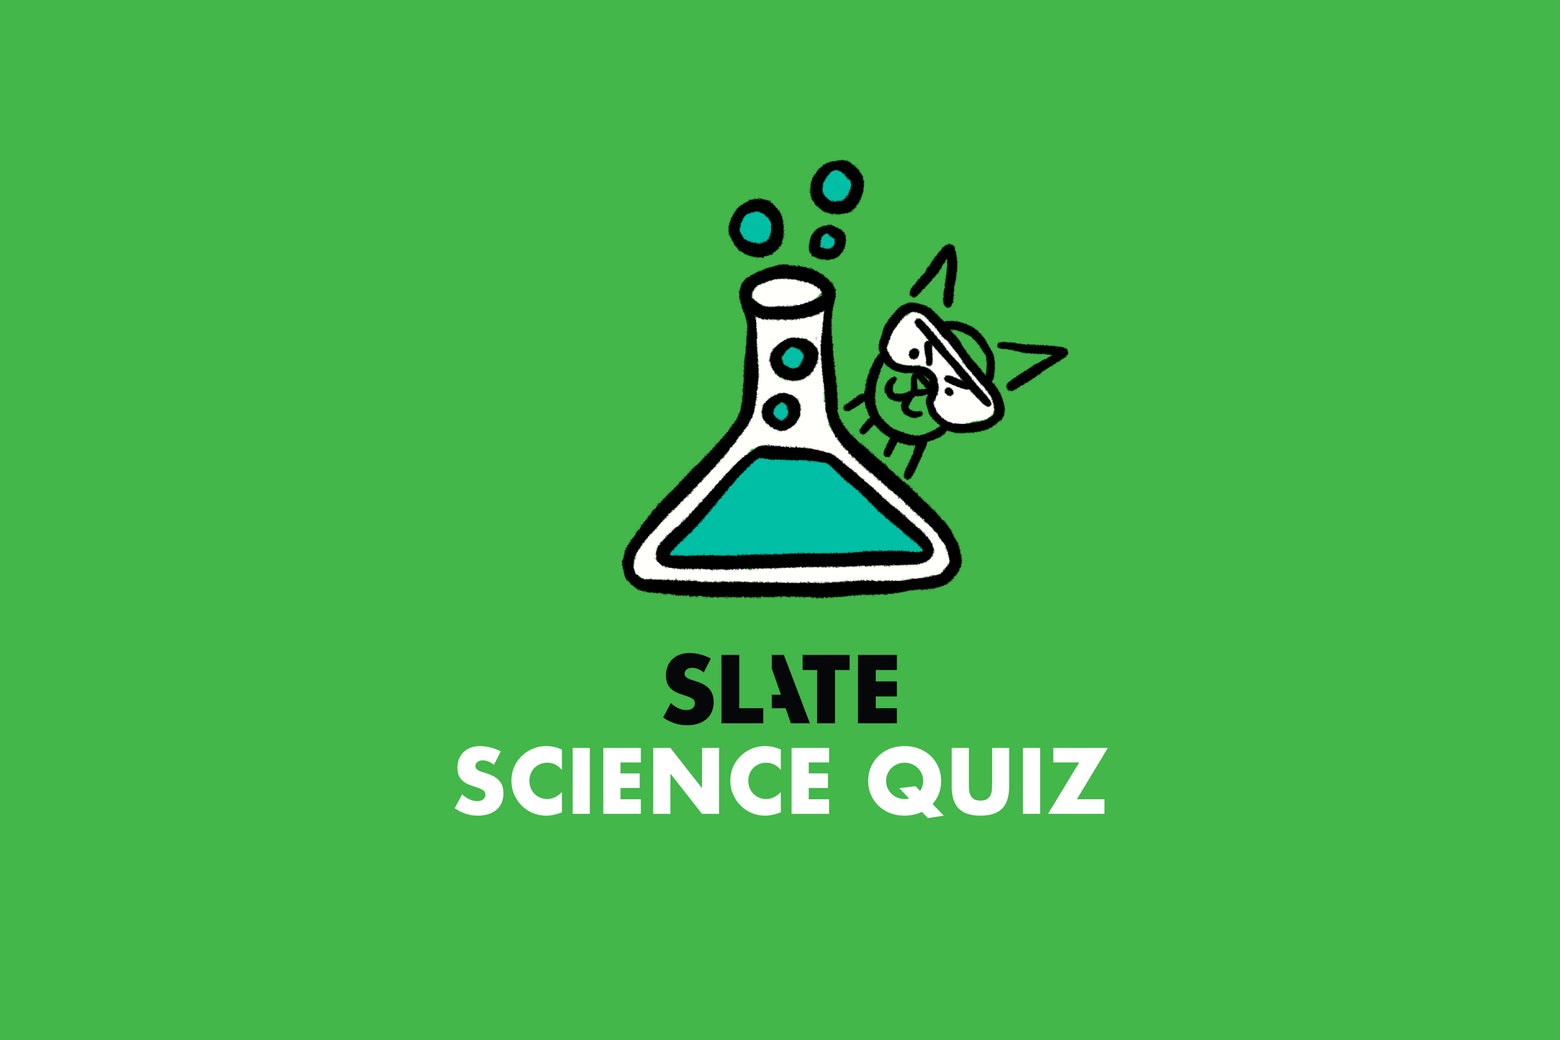 Slate’s Daily Q&A Session on Science